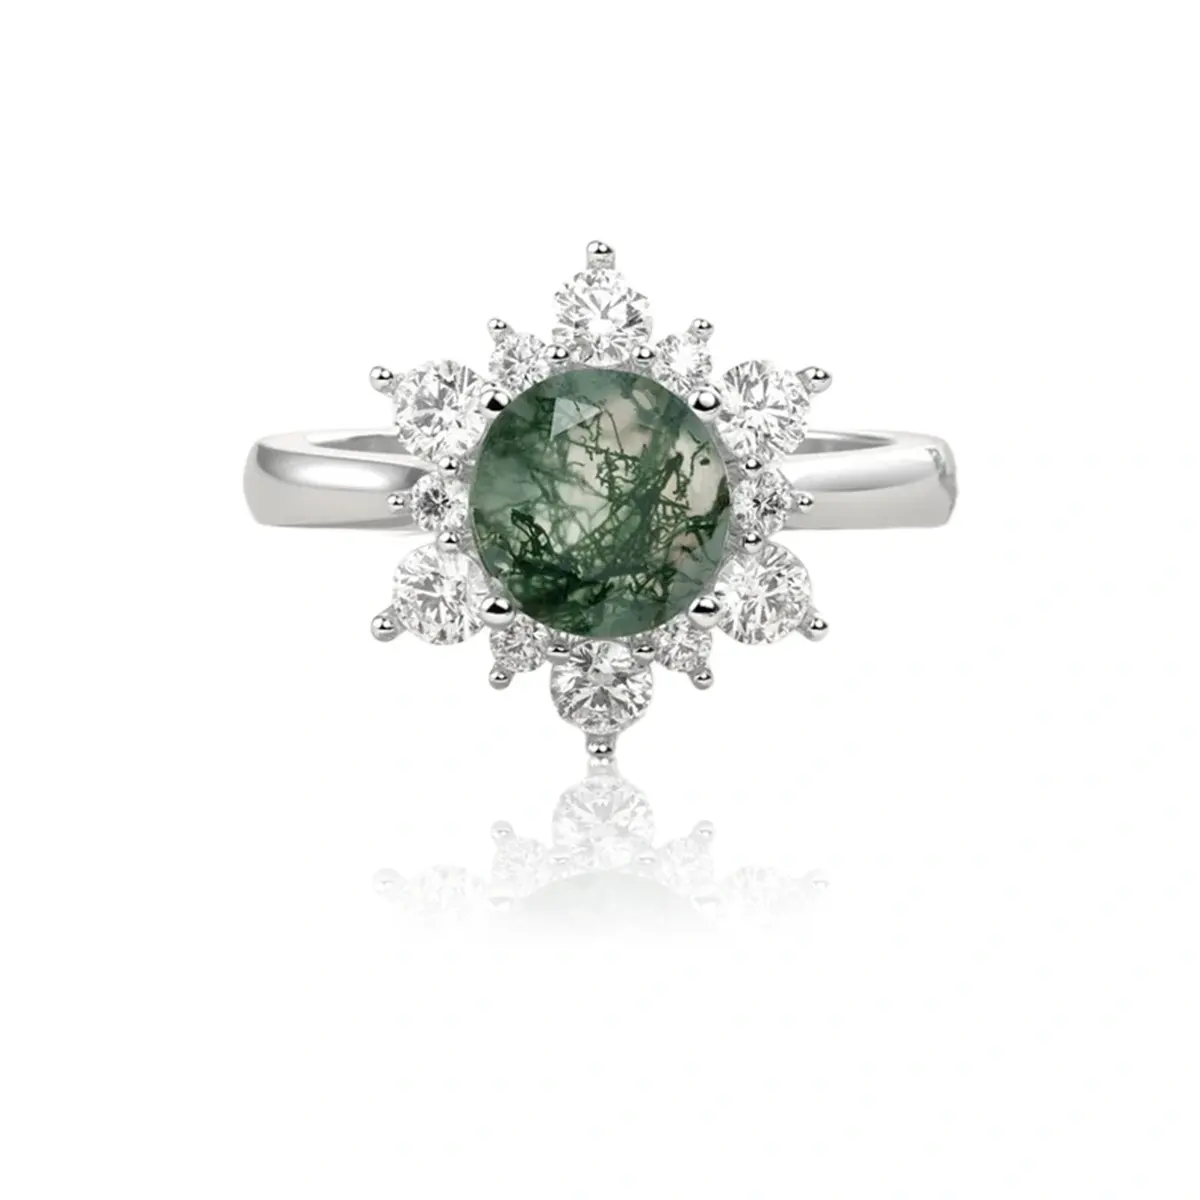 Fashion Jewelry Snowflake Round Moss Agate 925 Sterling Silver Cubic Zircon Ring For Women